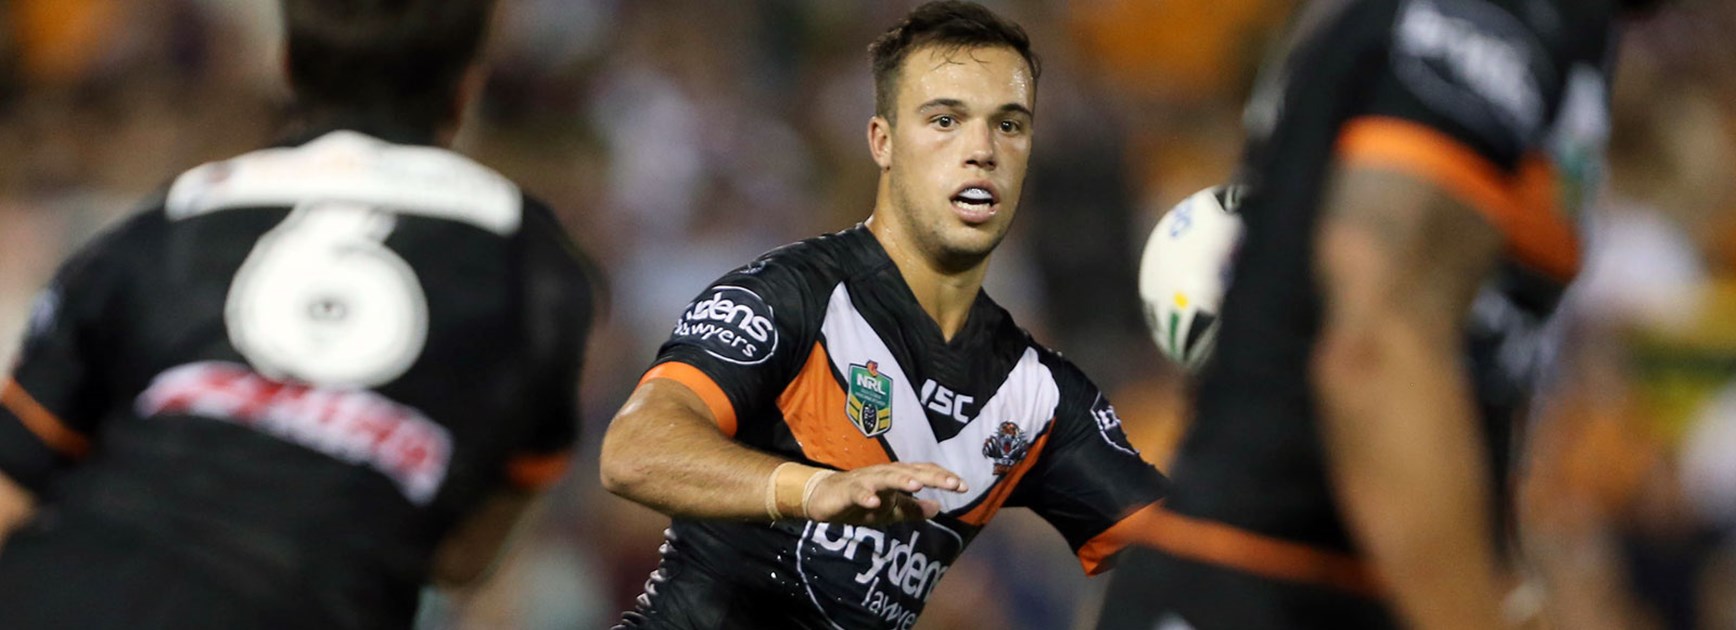 Wests Tigers halves Luke Brooks and Mitch Moses have the confidence of hooker Robbie Farah.